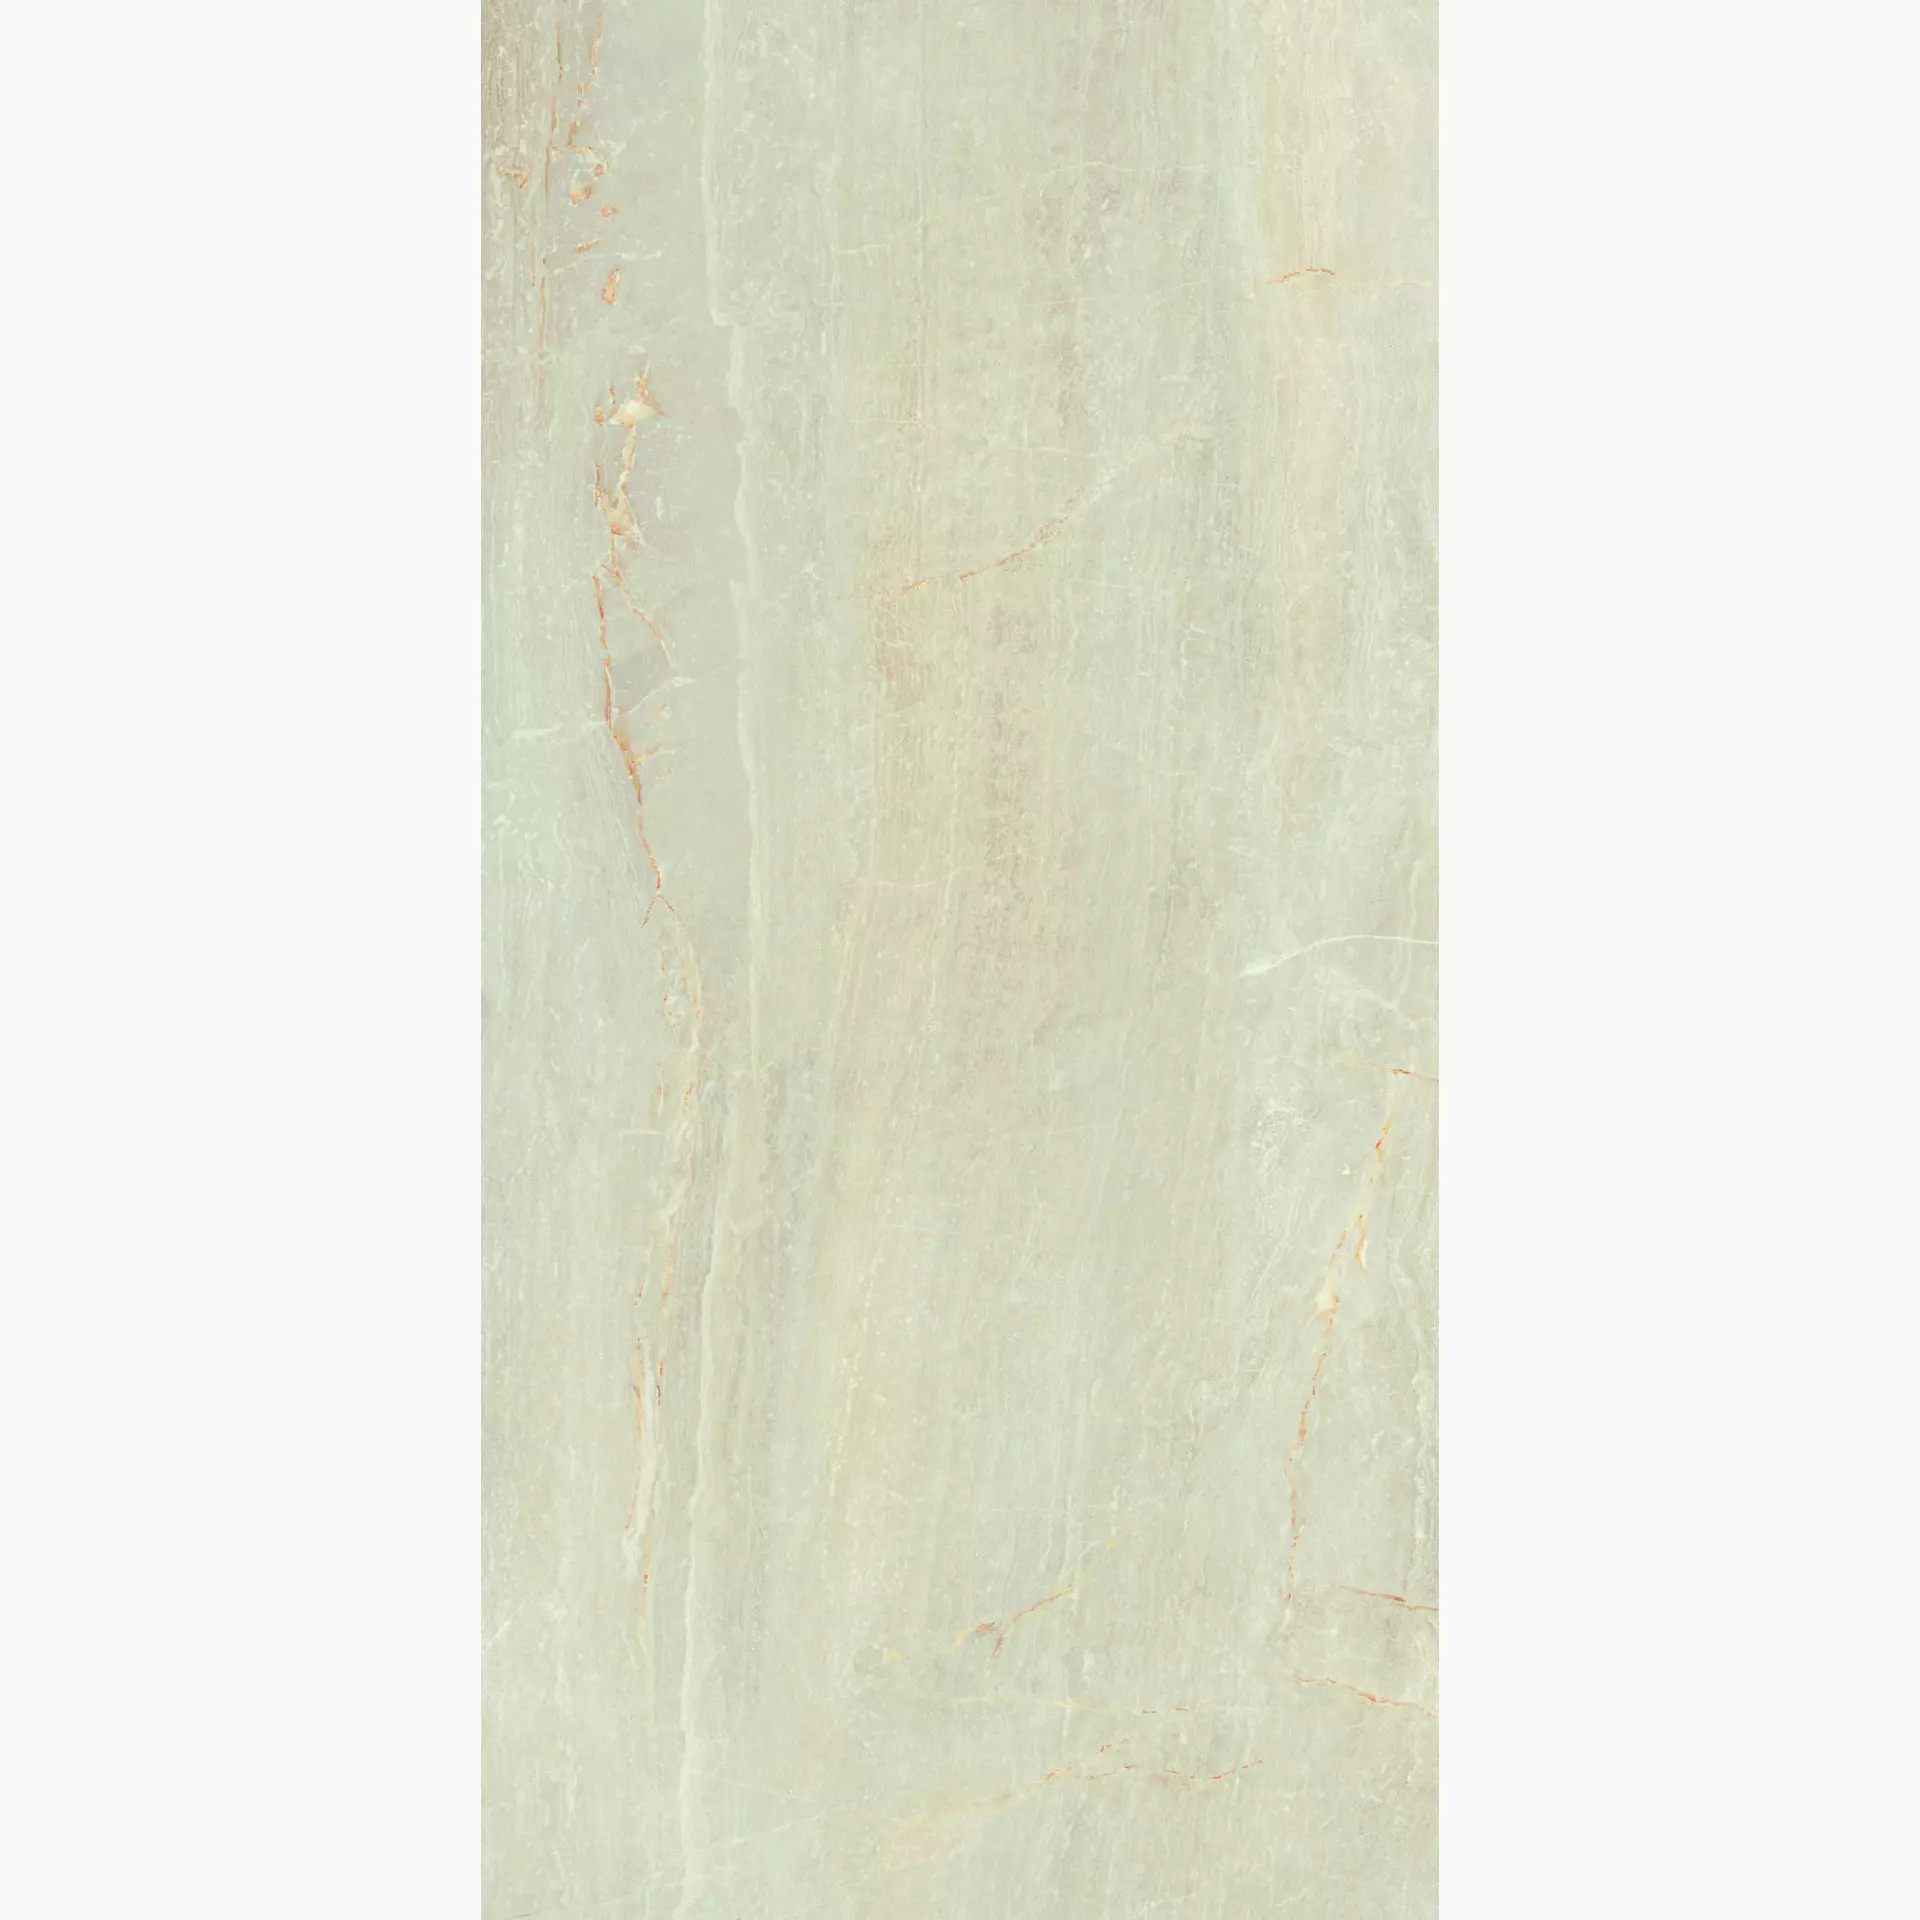 Serenissima Fossil Crema Lux 1066567 60x120cm rectified 9,5mm